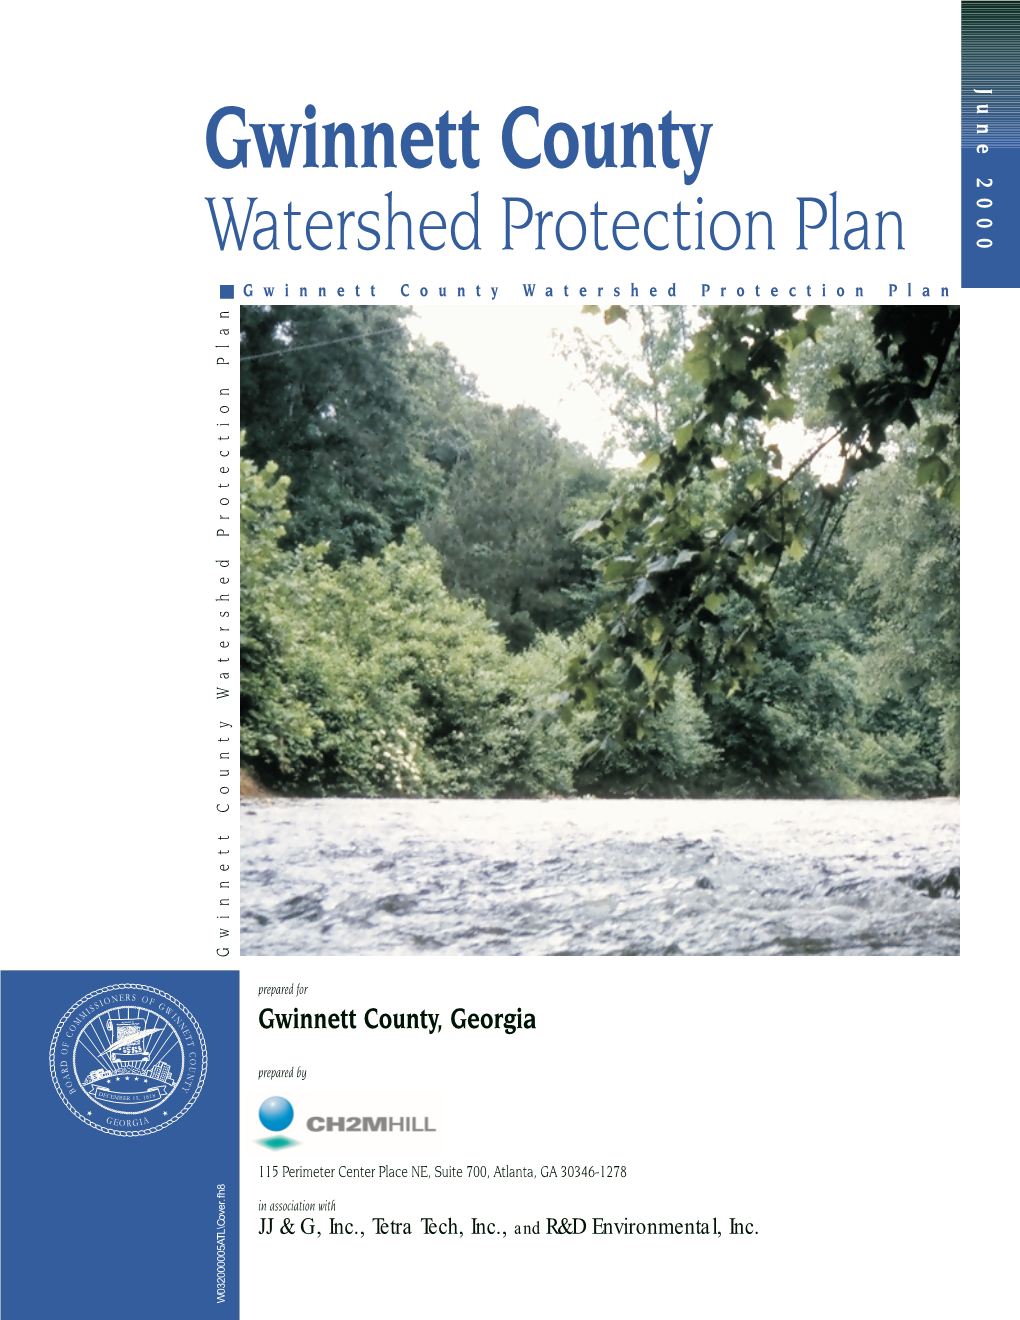 Watershed Protection Approach